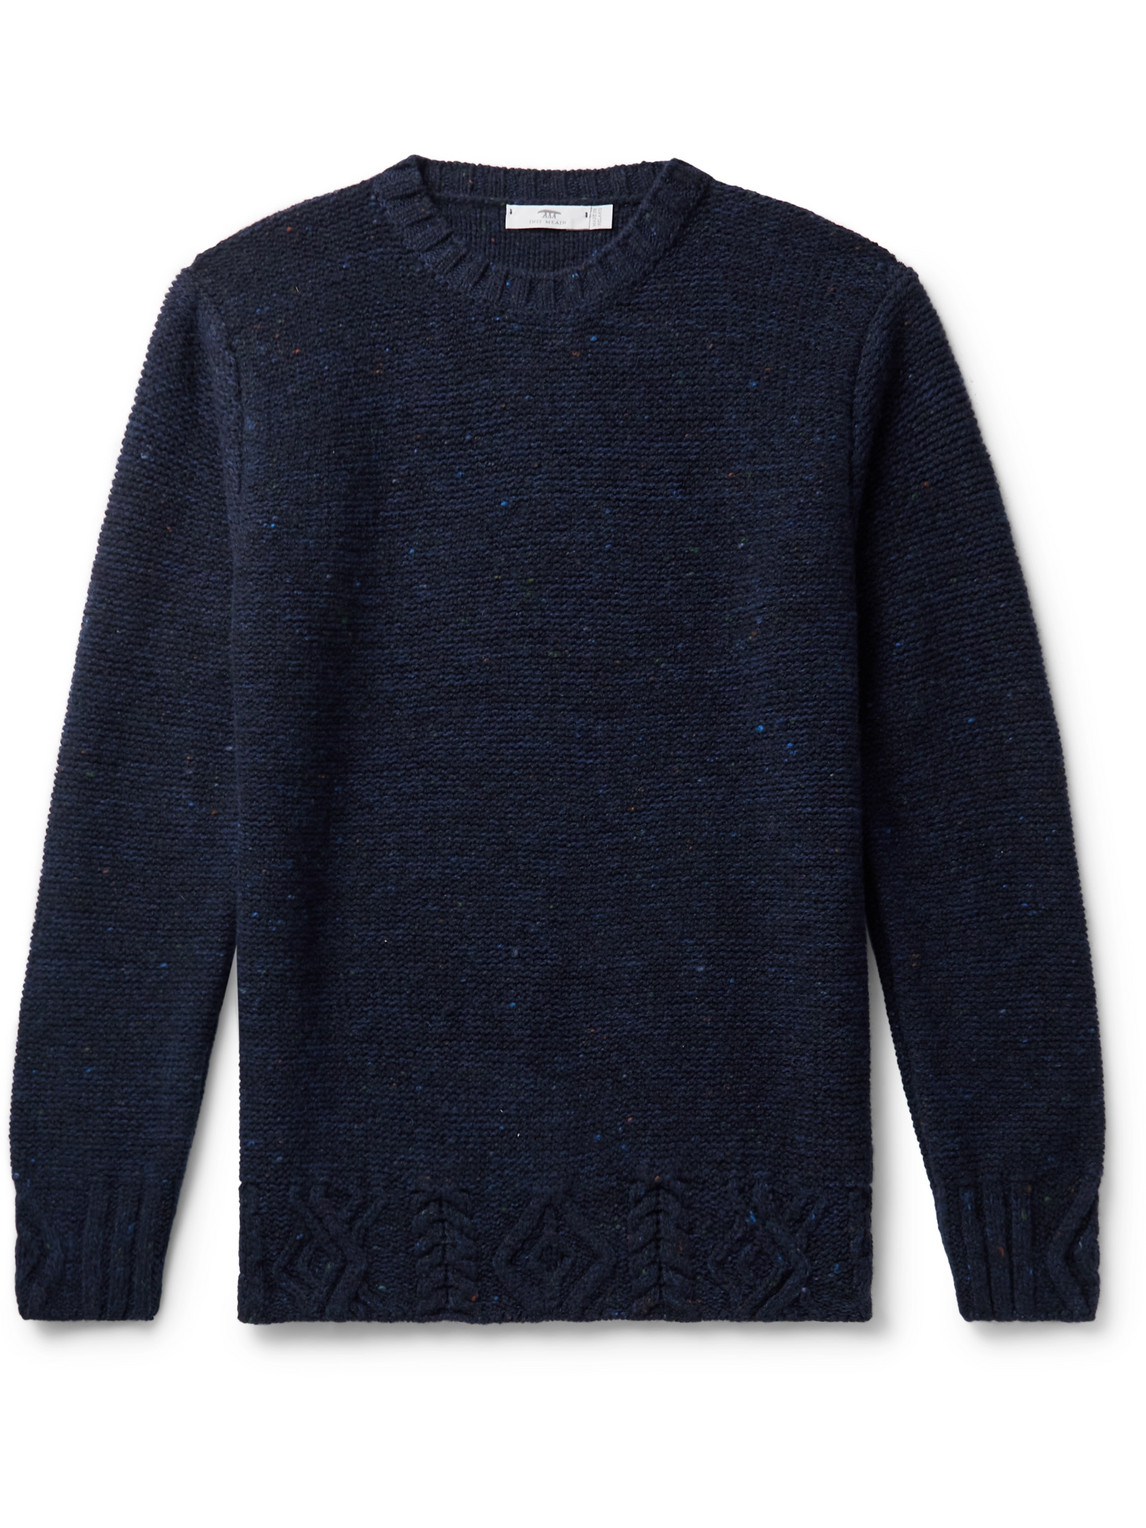 Inis Meáin Donegal Merino Wool and Cashmere-Blend Sweater